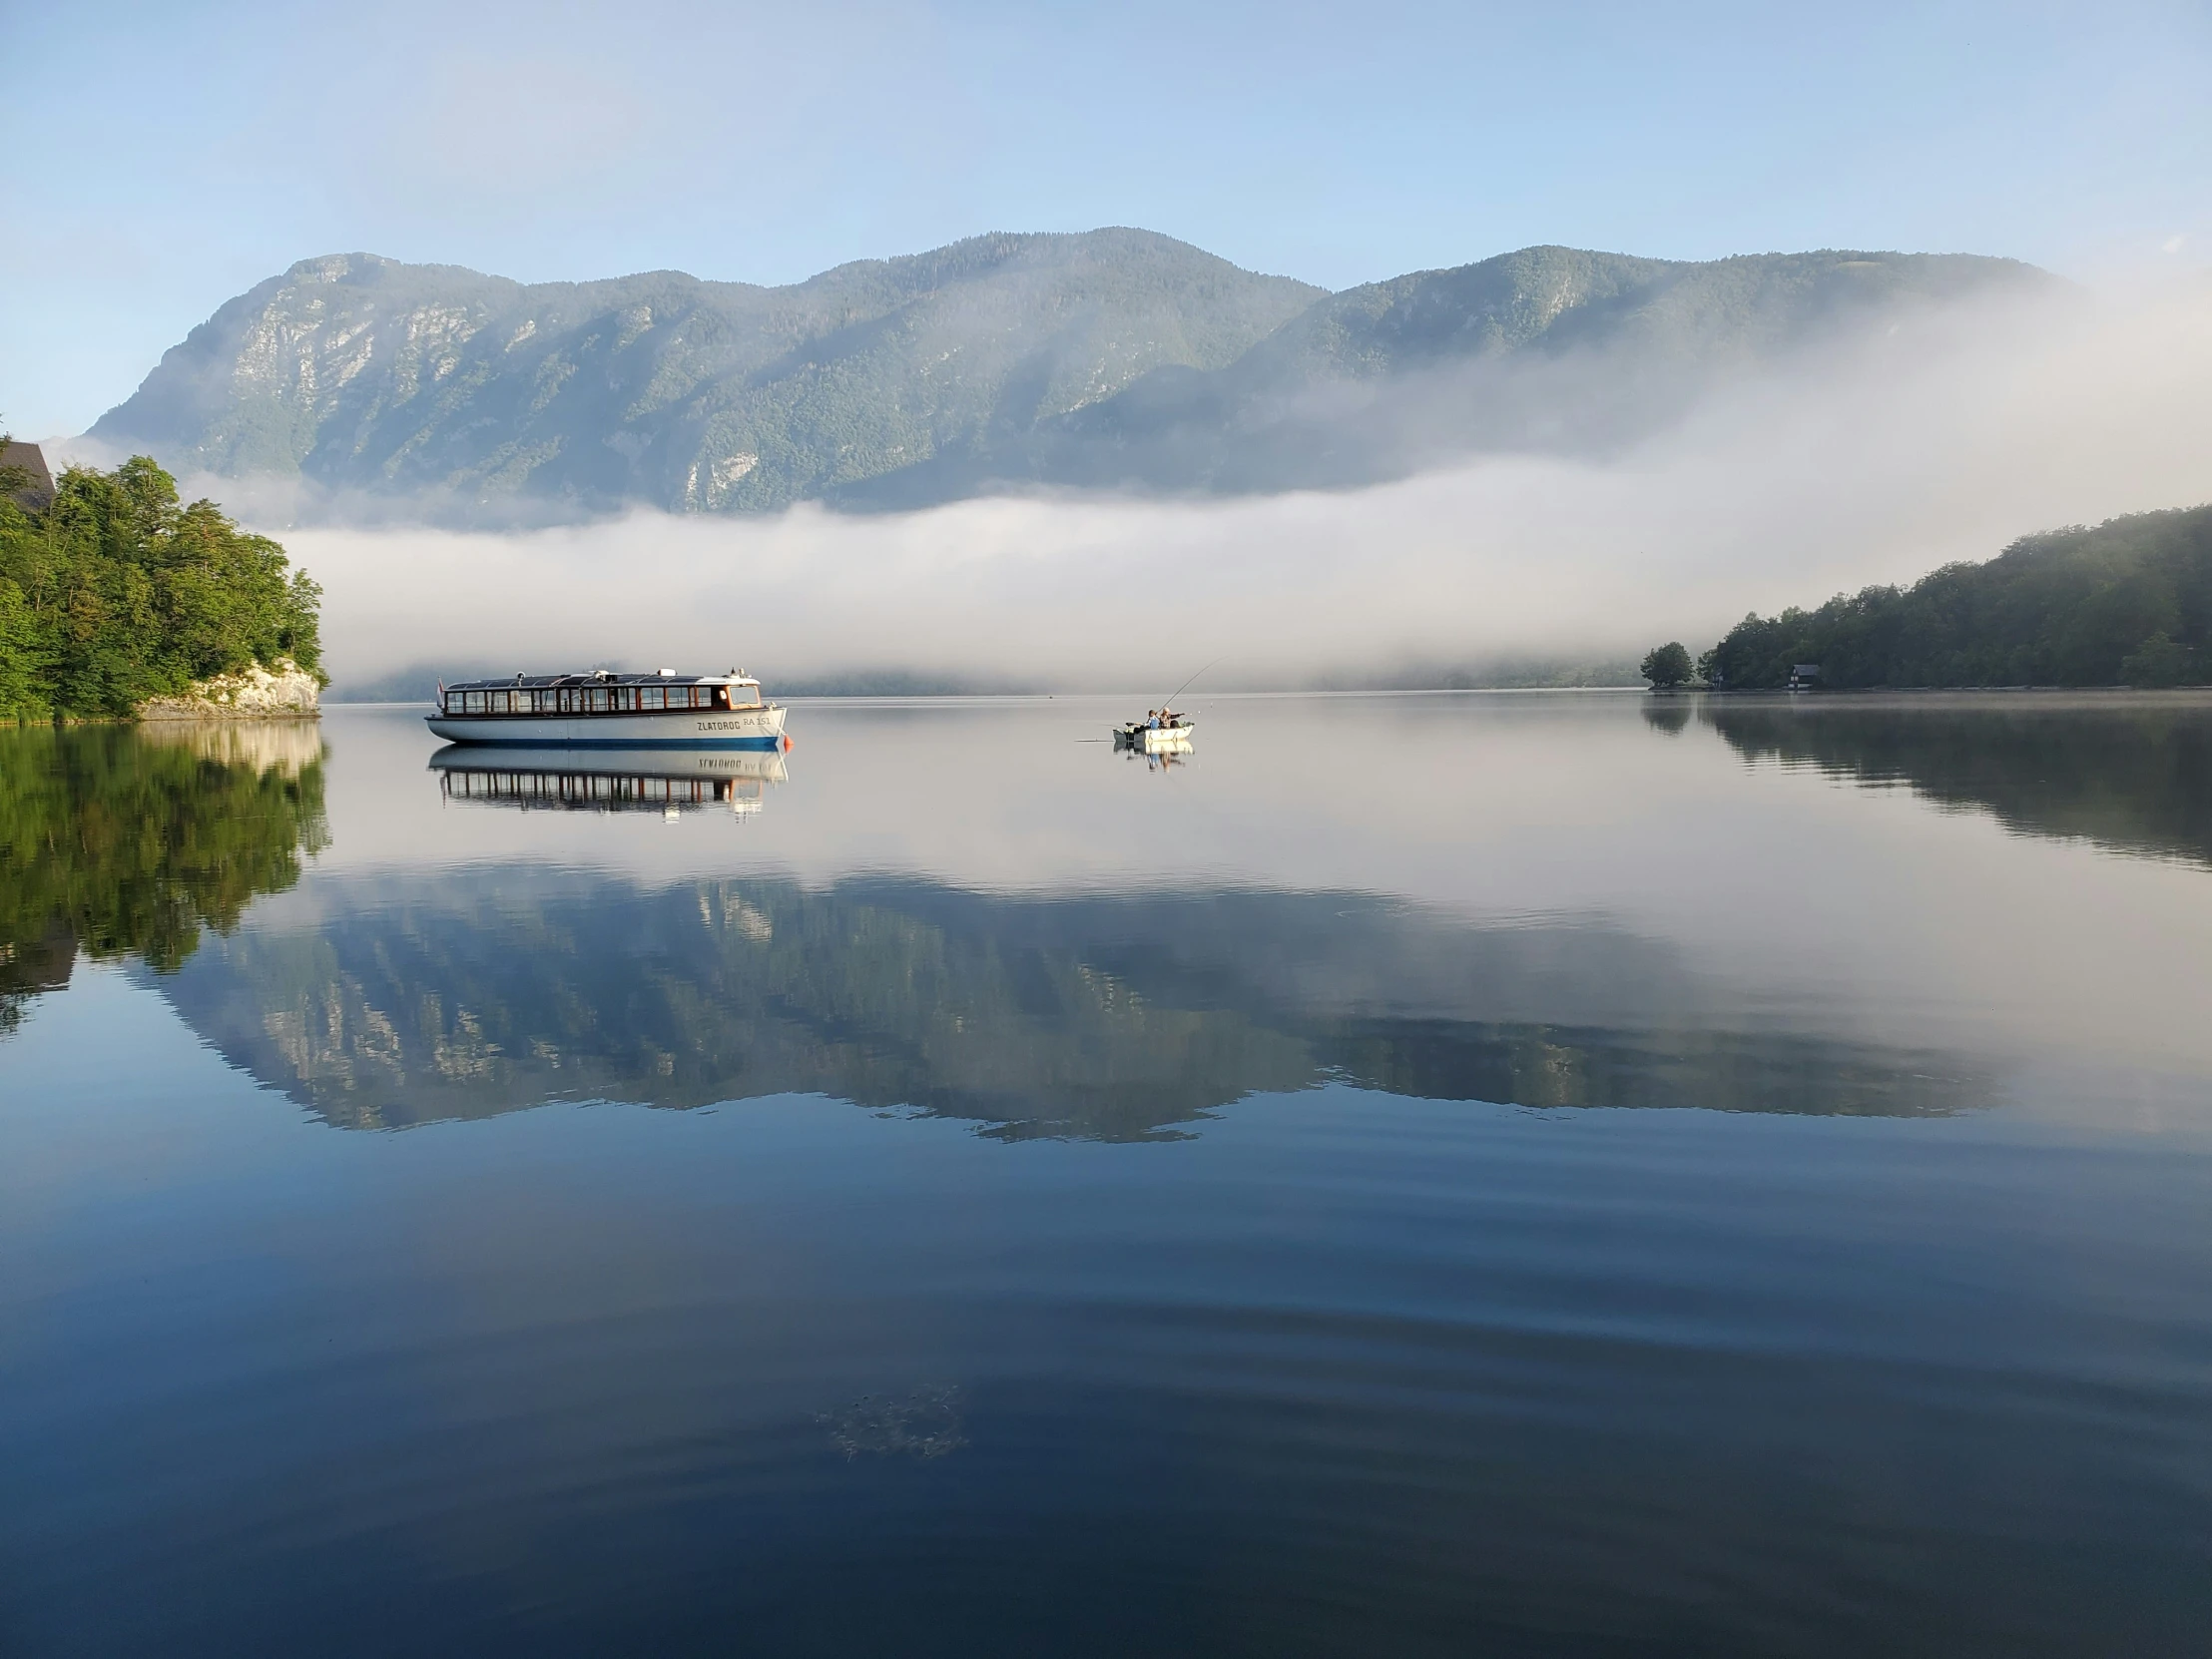 a ferry boat on a still lake surrounded by fog